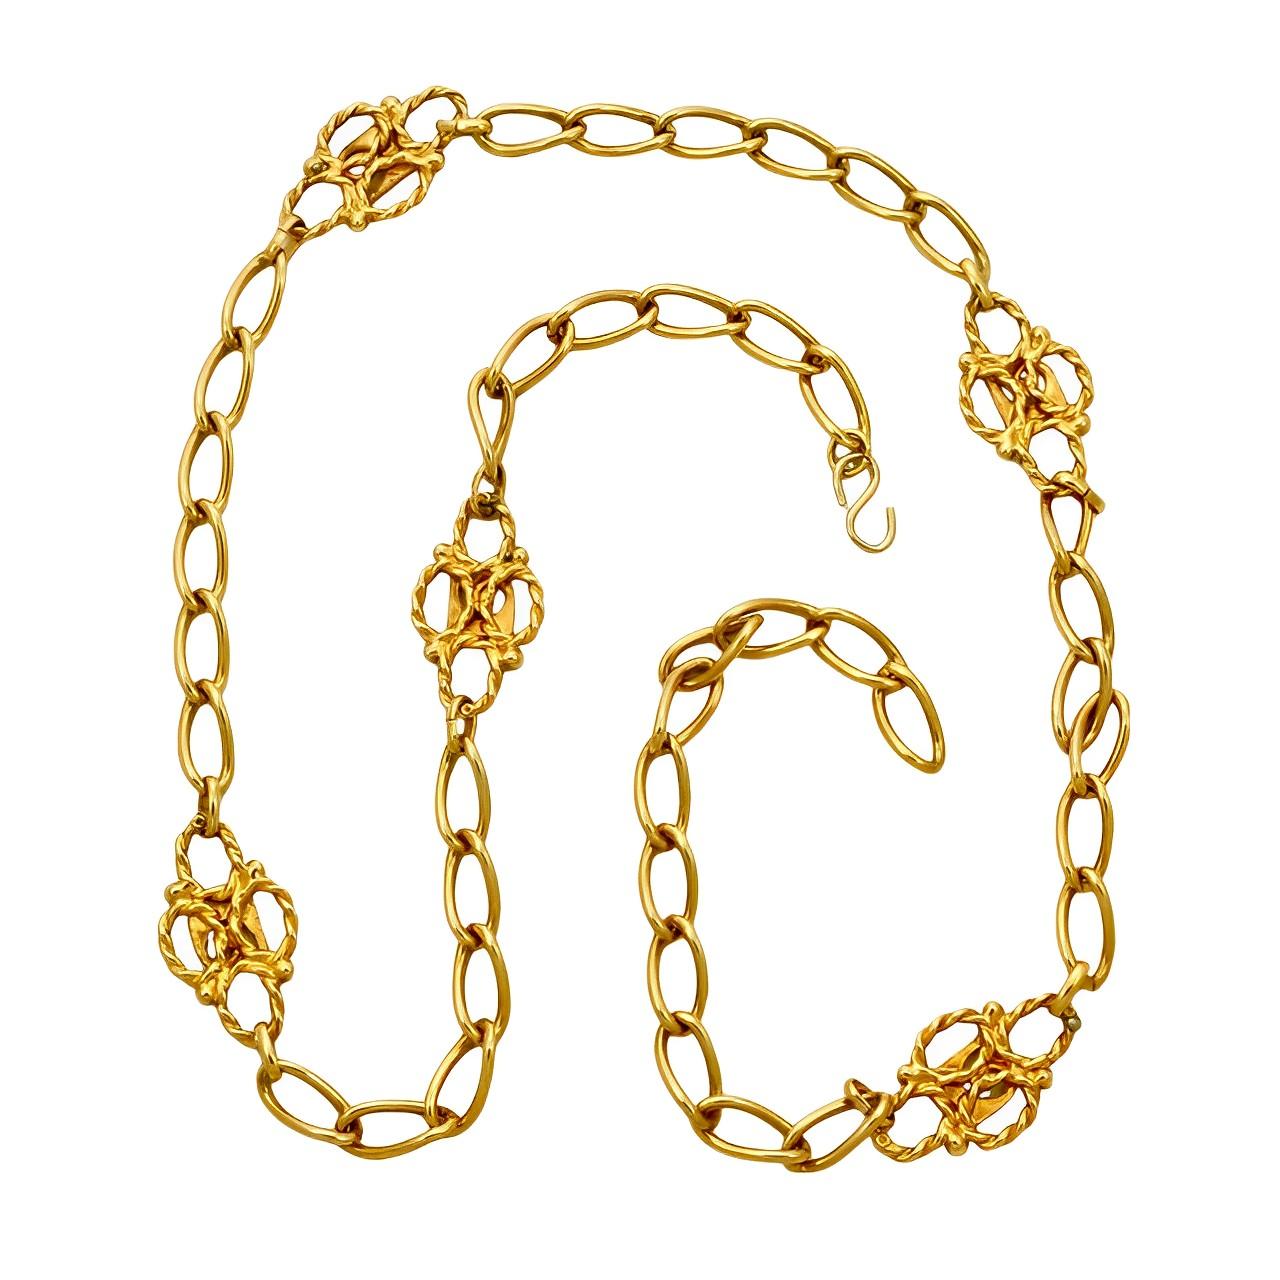 Pierre Cardin adjustable gold plated chain link belt, with ornate rope twist and monogram detail. Measuring length 108 cm / 42.5 inches, and the monogram detail is width 2.6 cm / 1 inch. The belt is in very good condition with some minor wear to the